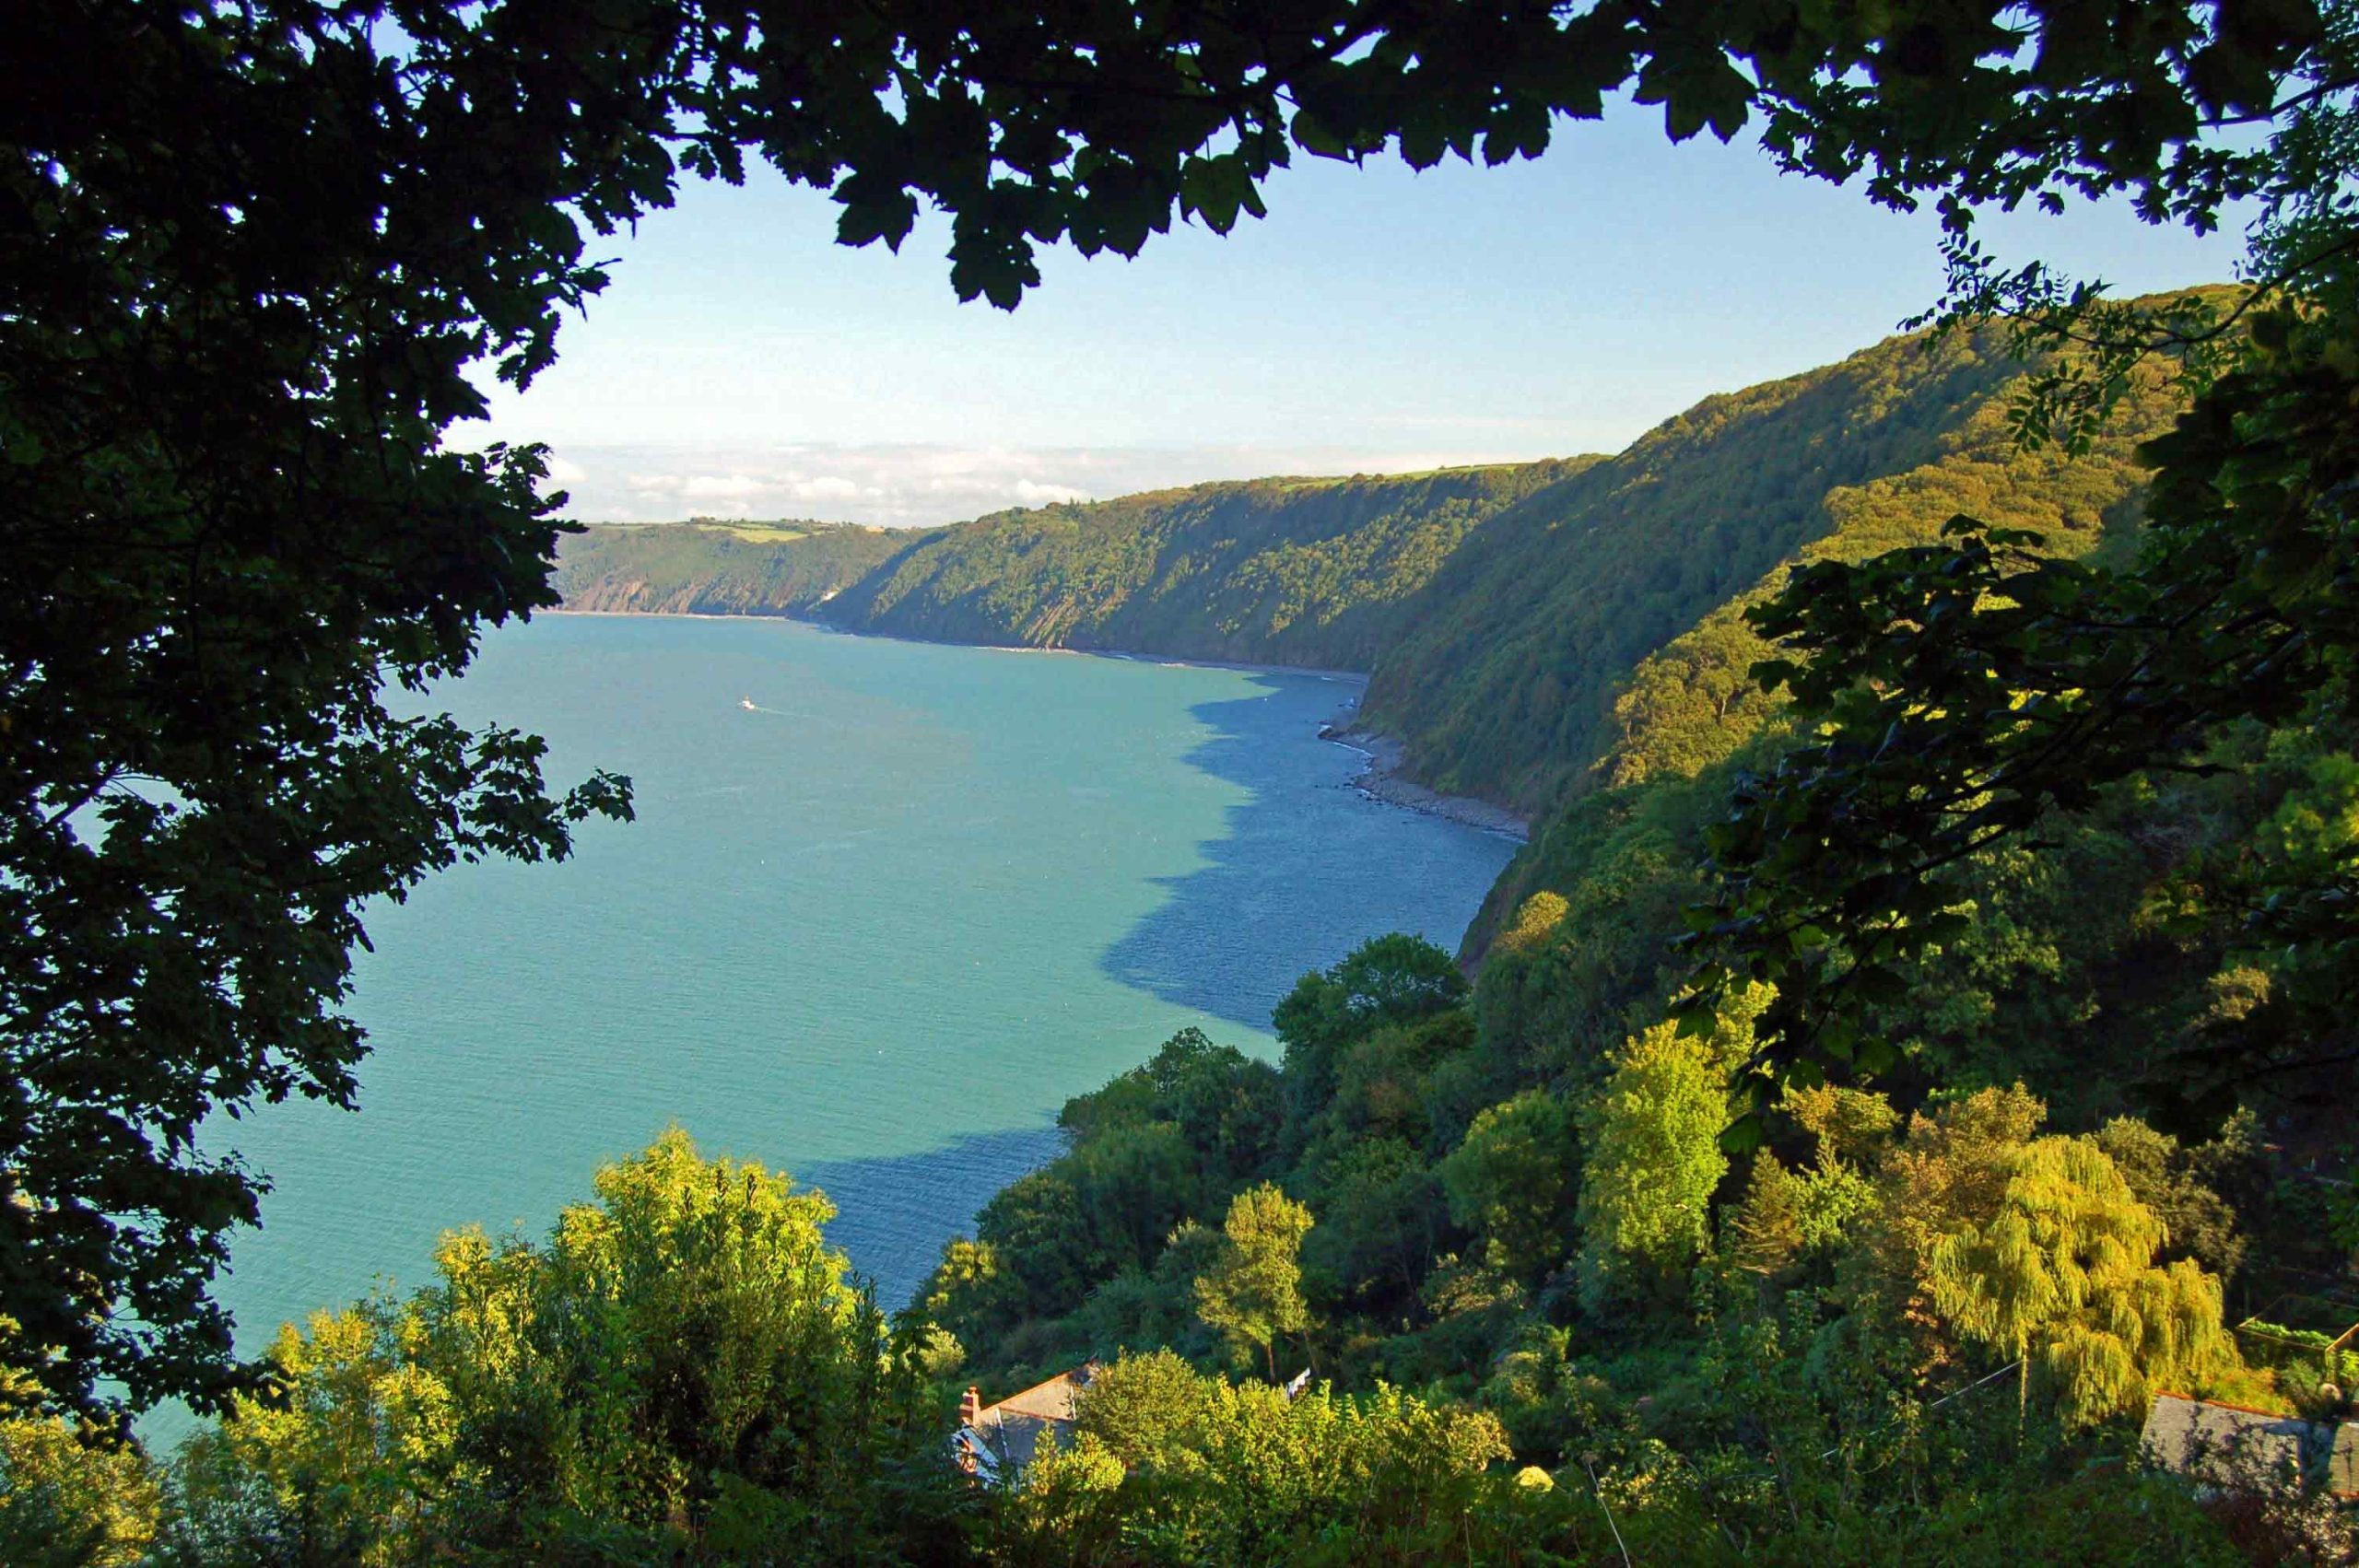 Stunning View of Clovelly Bay